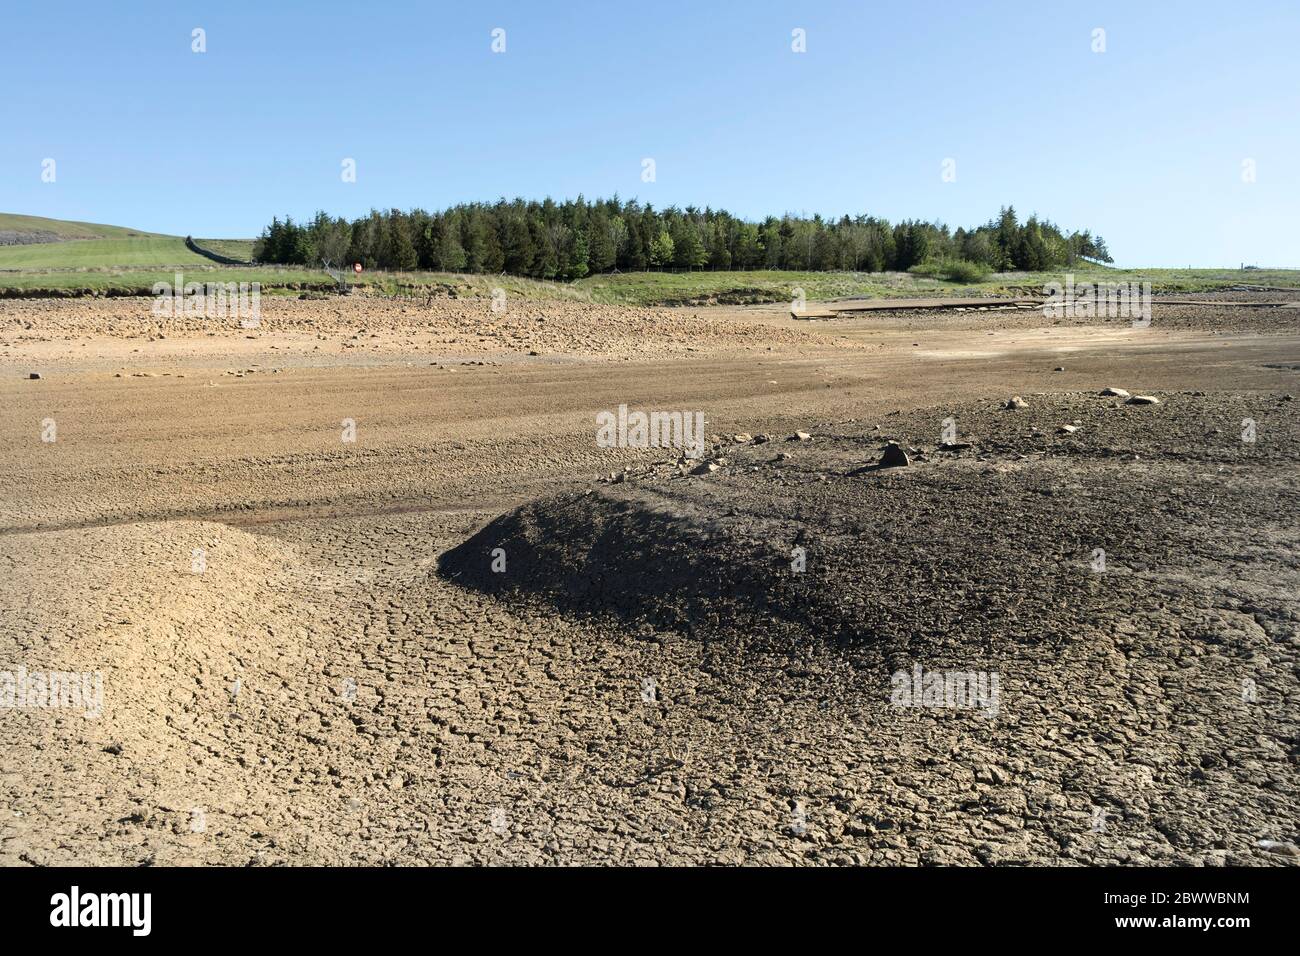 Low Water Levels at Selset Reservoir after the driest May on record, coupled with repair work downstream left the Ground Parched and Cracked, Lunedale Stock Photo